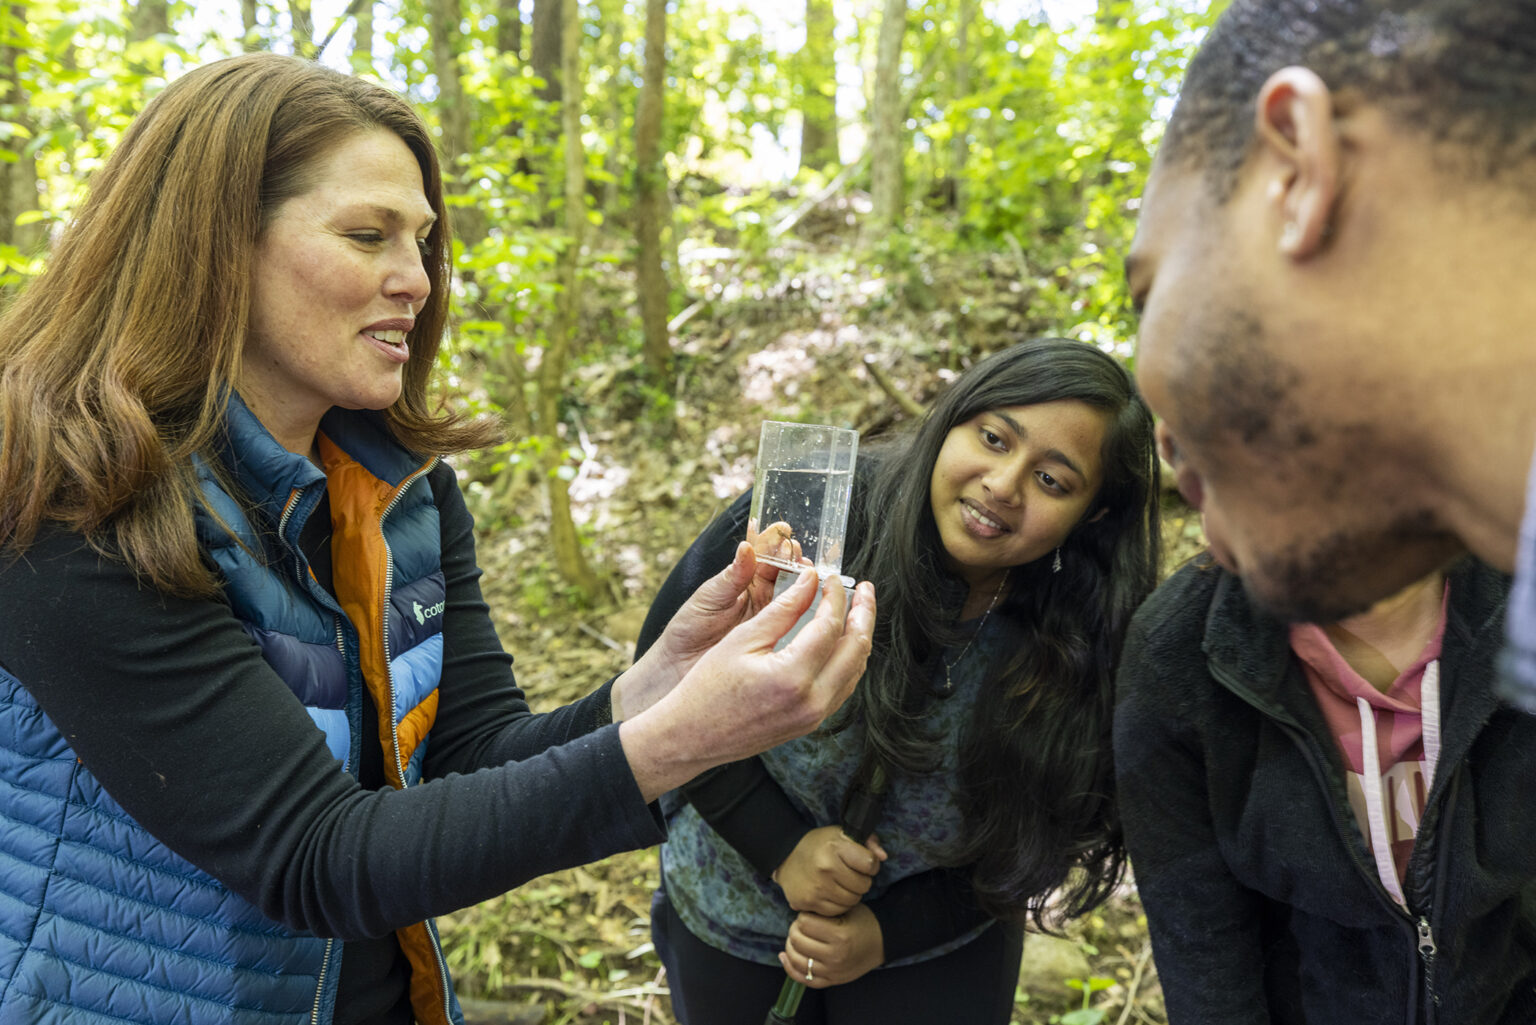 A woman wearing a blue and orange puffy vest with a black shirt smiles as she looks at a small glass box containing an aquatic specimen. Three students gather around to look closely at it. In the background, sunlight filters through green tree canopy.